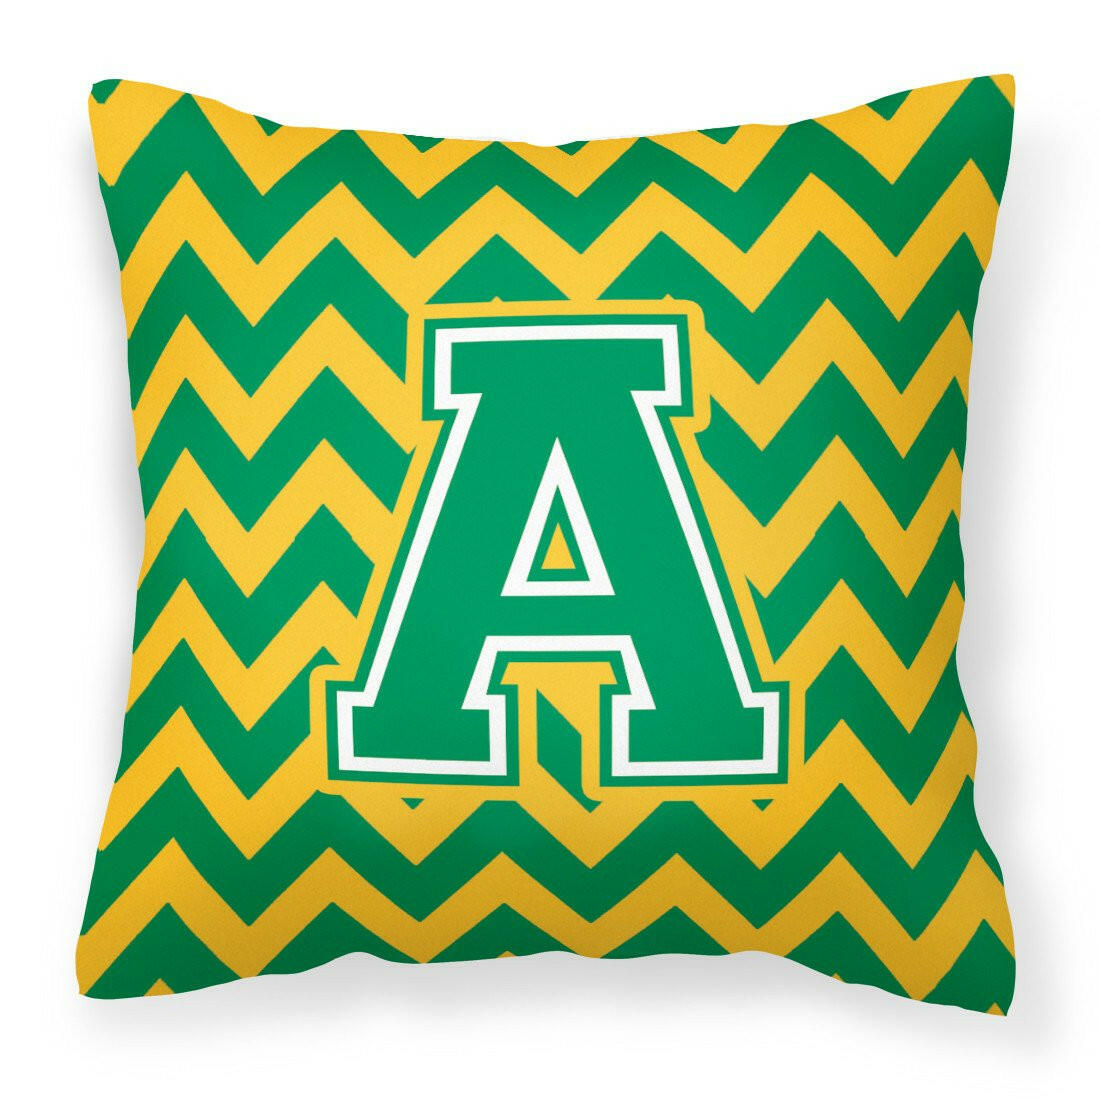 Letter A Chevron Green and Gold Fabric Decorative Pillow CJ1059-APW1414 by Caroline's Treasures